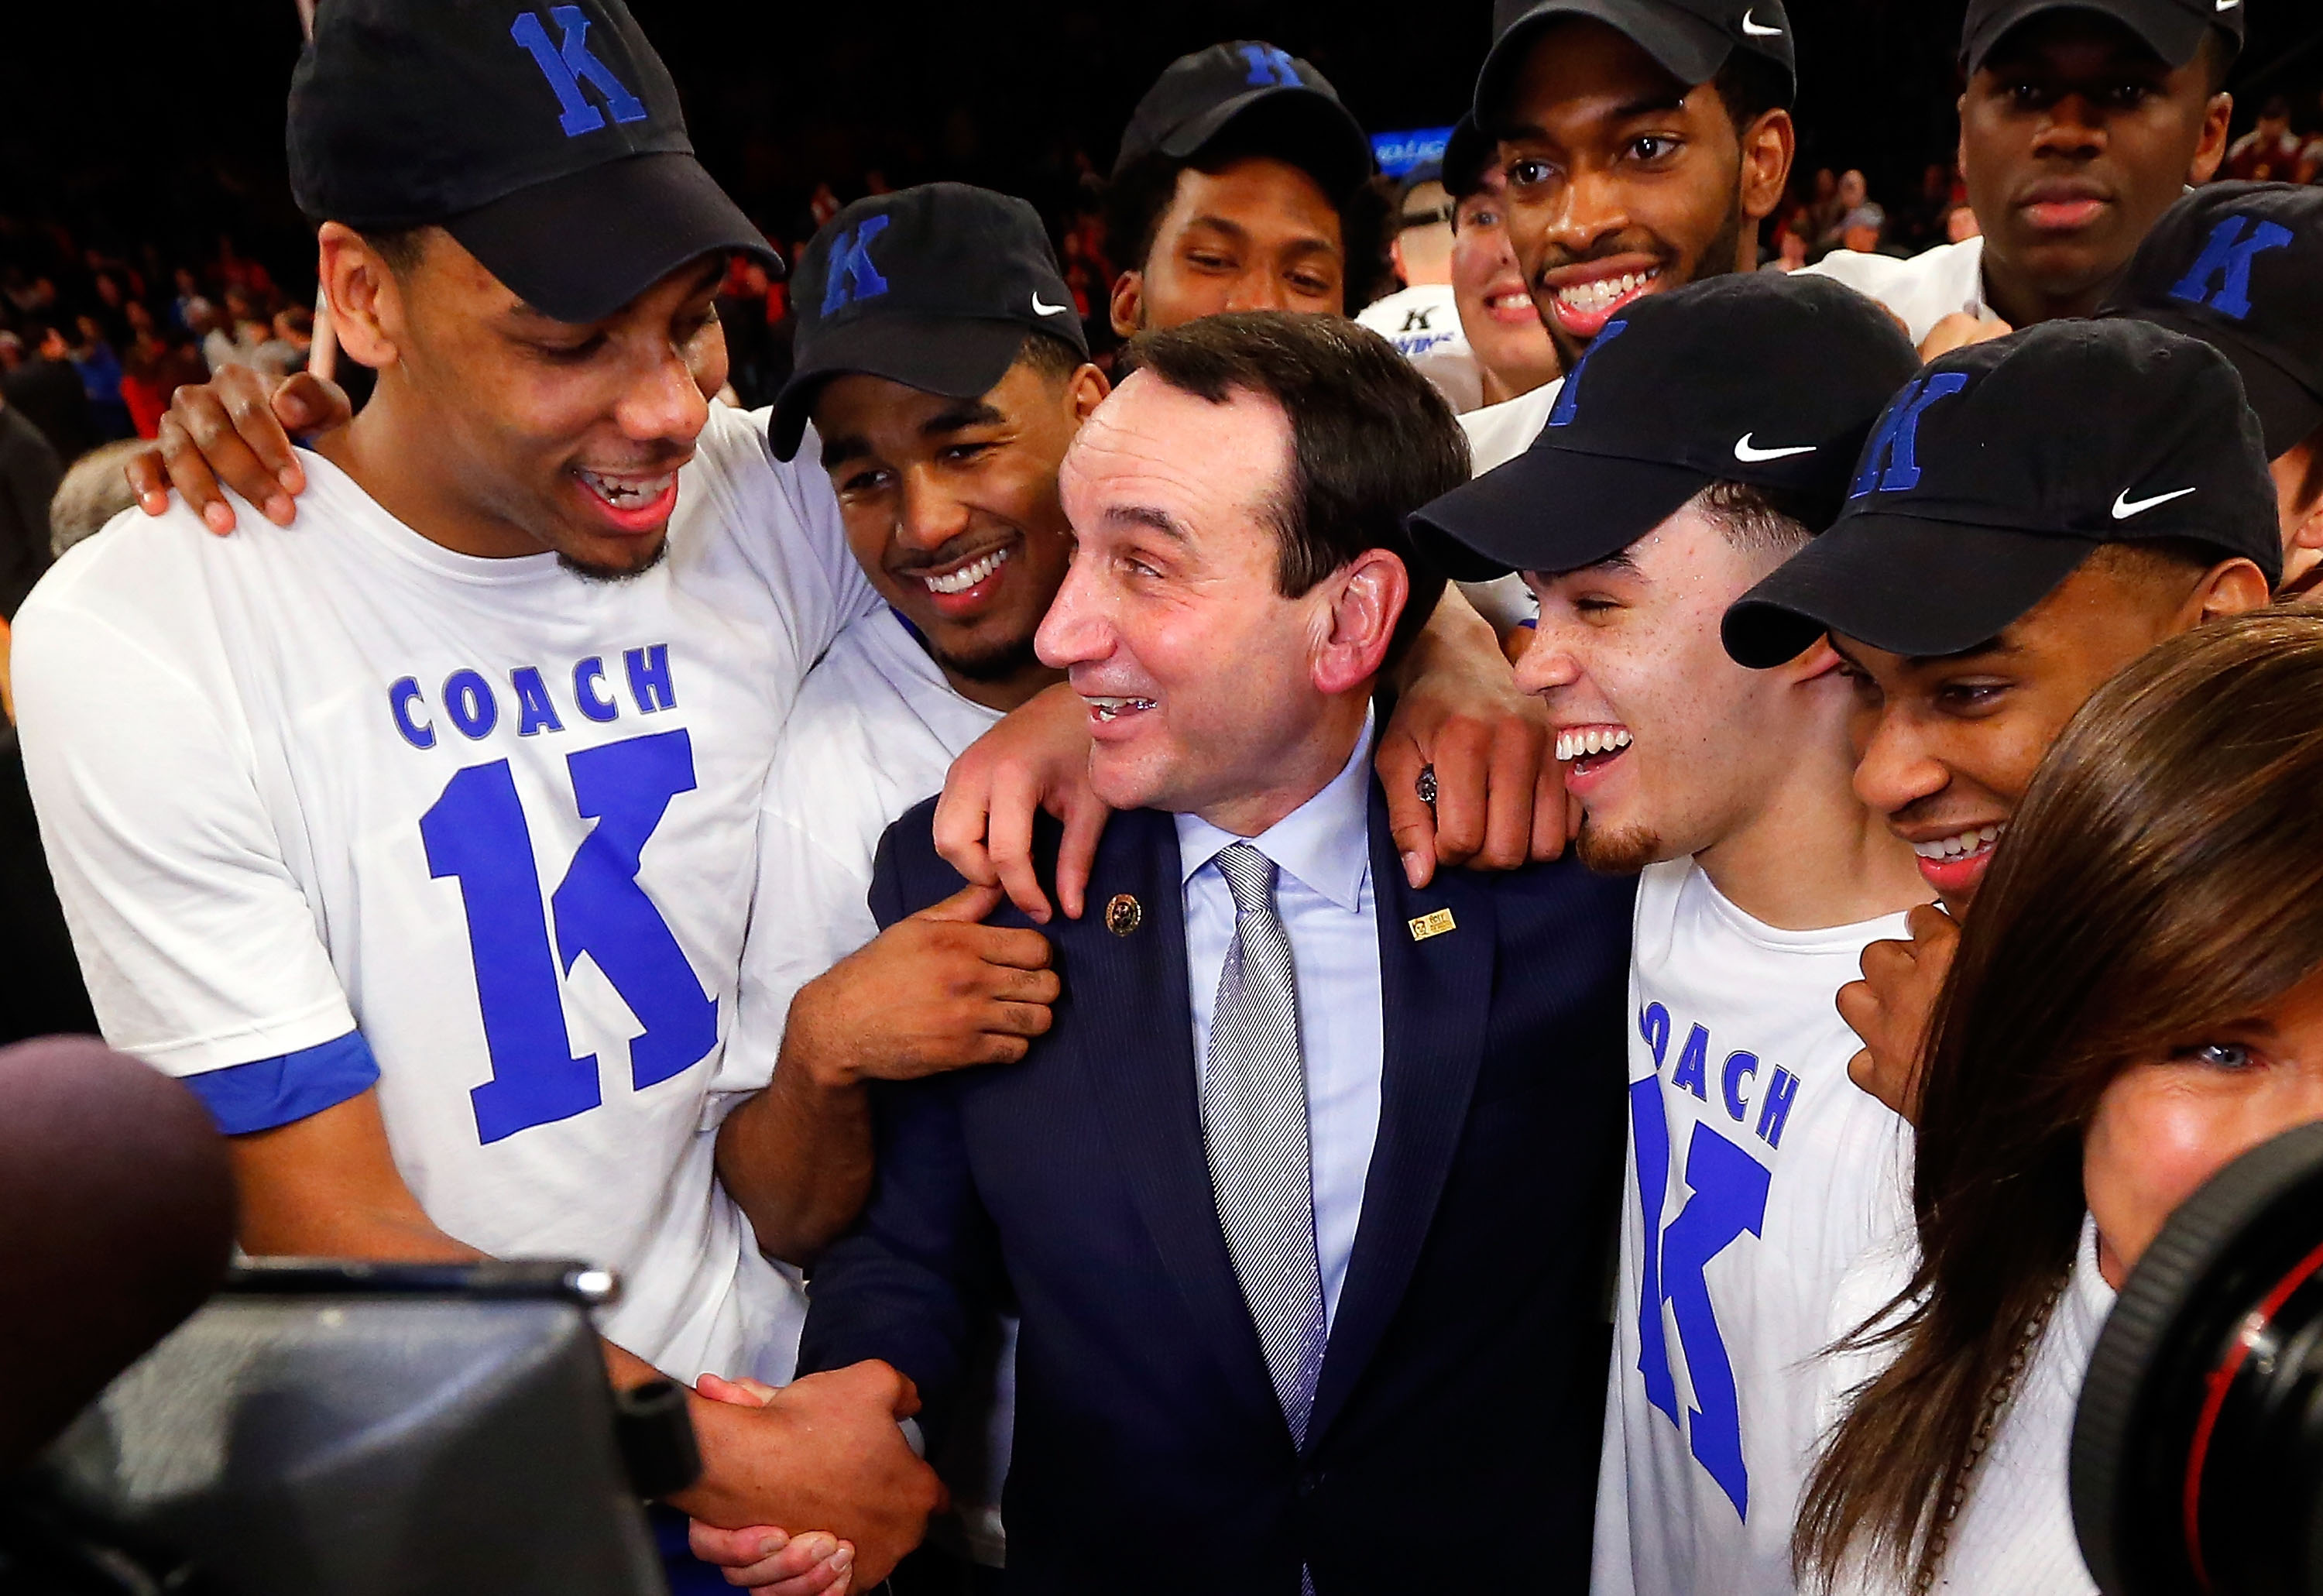 Head coach Mike Krzyzewski of the Duke Blue Devils celebrates with his players after defeating the St. John's Red Storm earning his 1,000th career victory on January 25 2015 at Madison Square Garden in New York City. Duke defeated St John's 77-68.